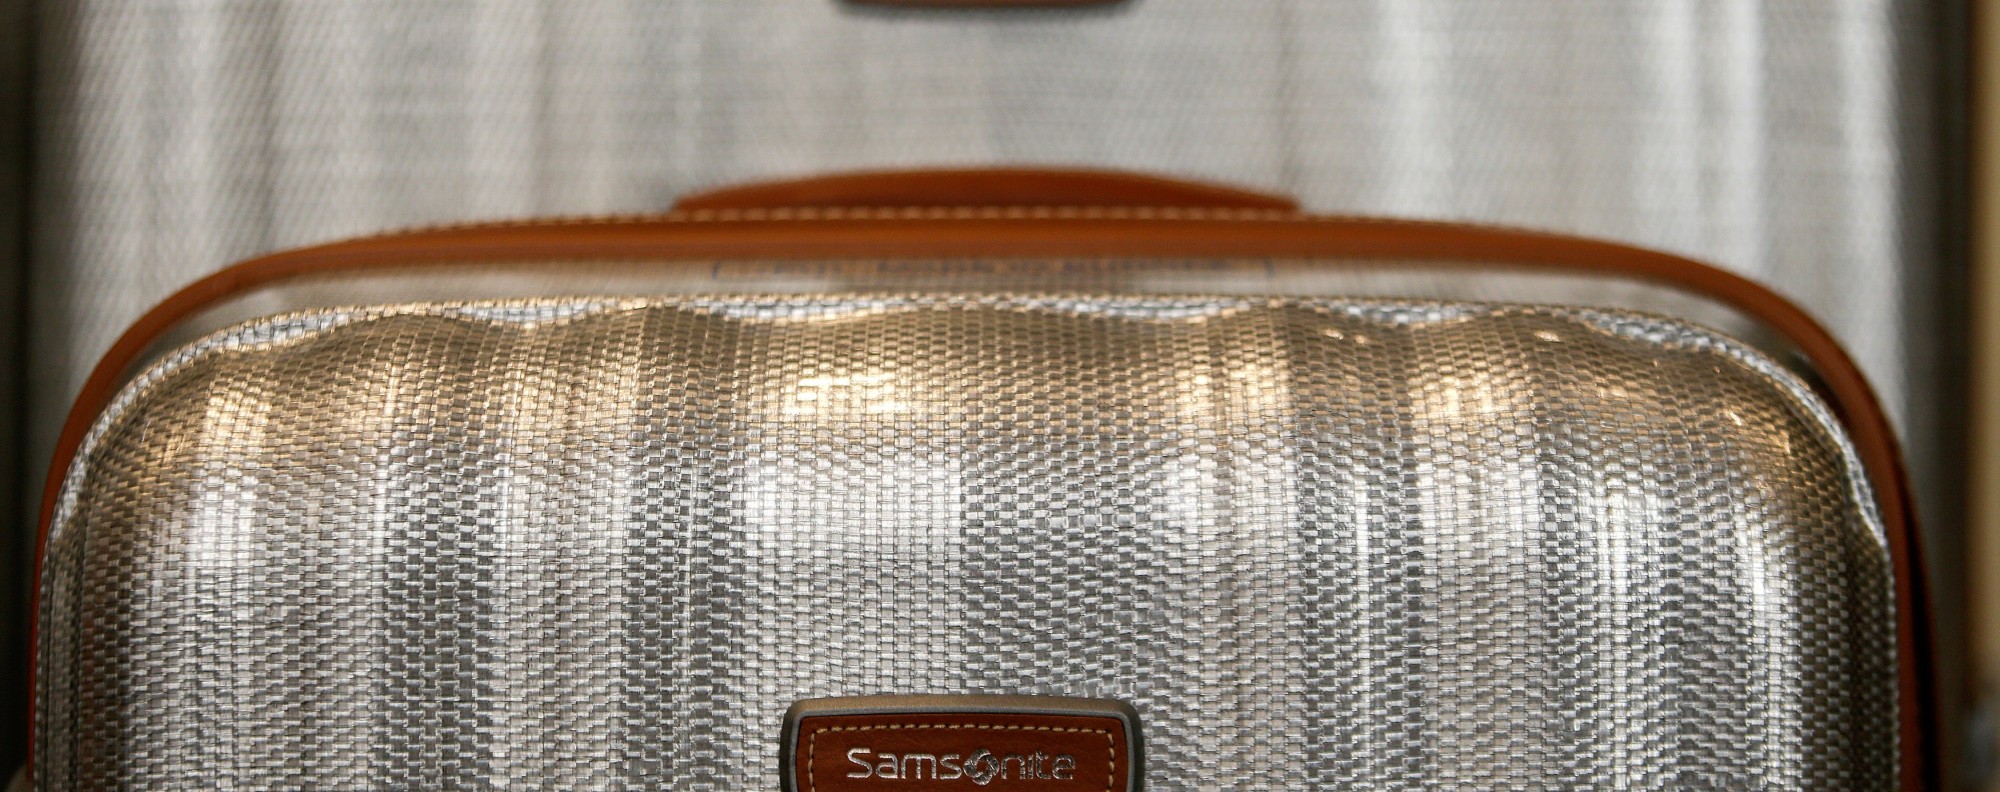 Zeebrasem Met opzet niettemin Luggage giant Samsonite accused of 'questionable accounting practises' |  South China Morning Post